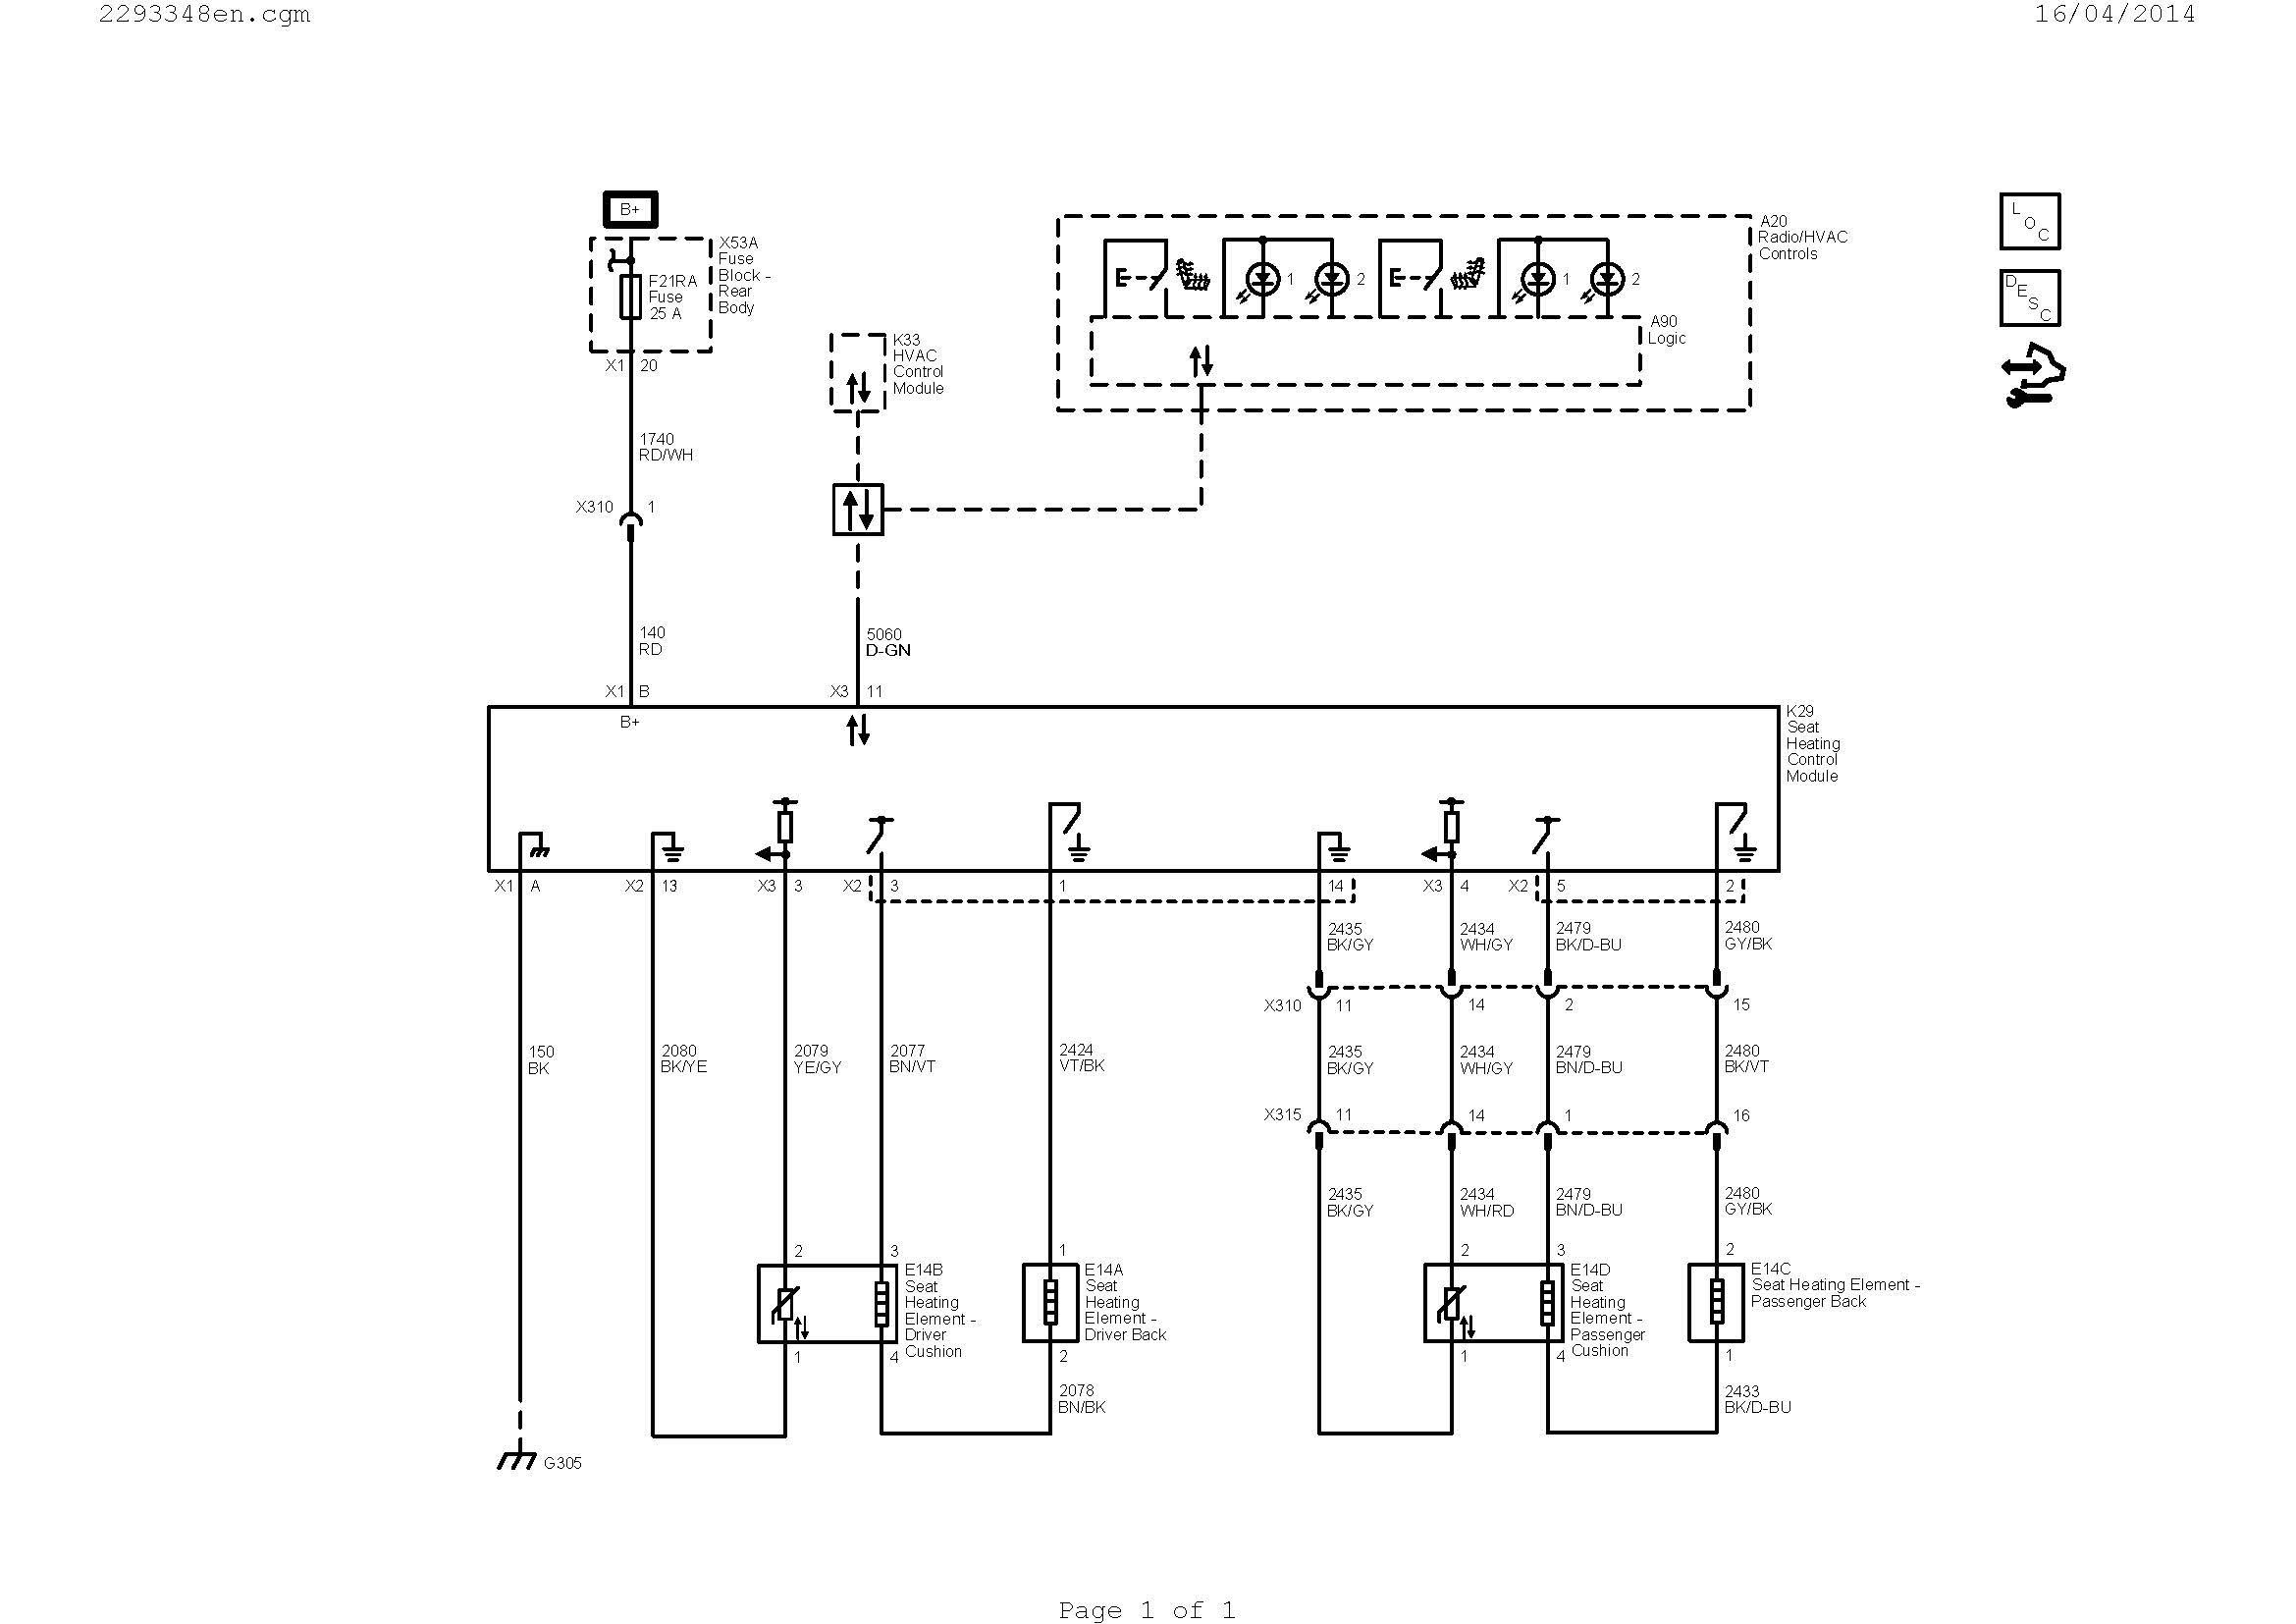 ac wiring diagram Collection Wiring A Ac Thermostat Diagram New Wiring Diagram Ac Valid Hvac